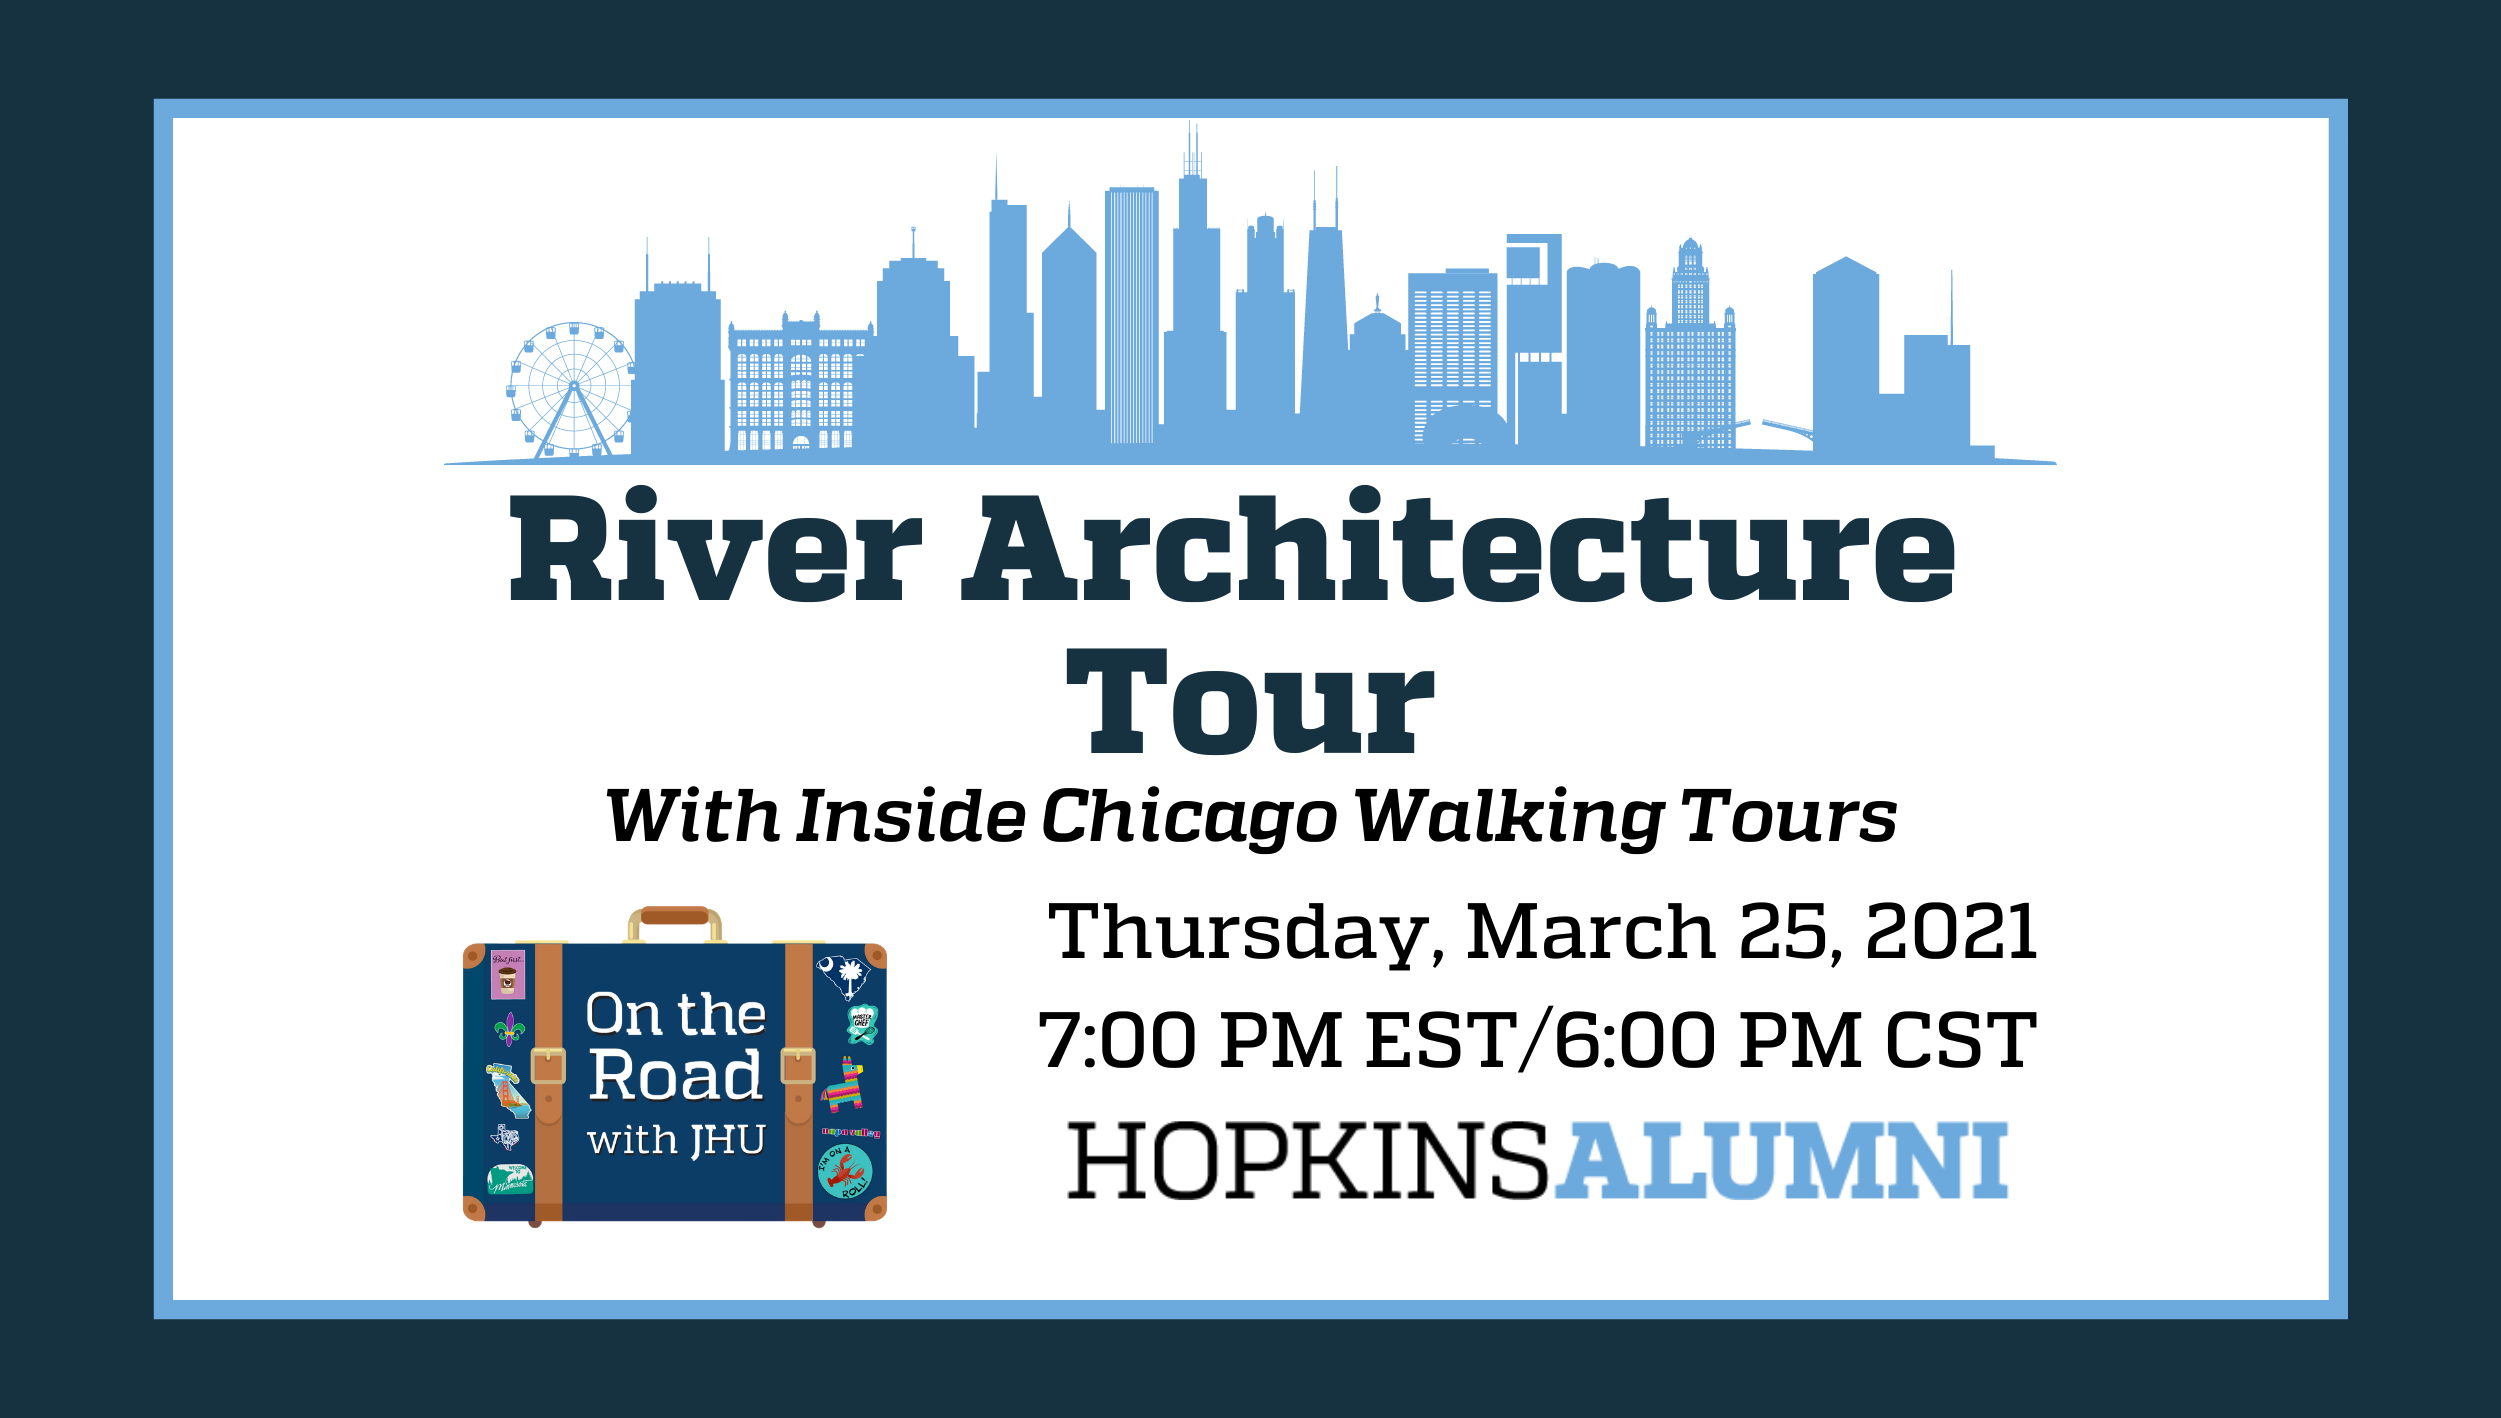 On the Road with JHU: Inside Chicago River Architecture Tour